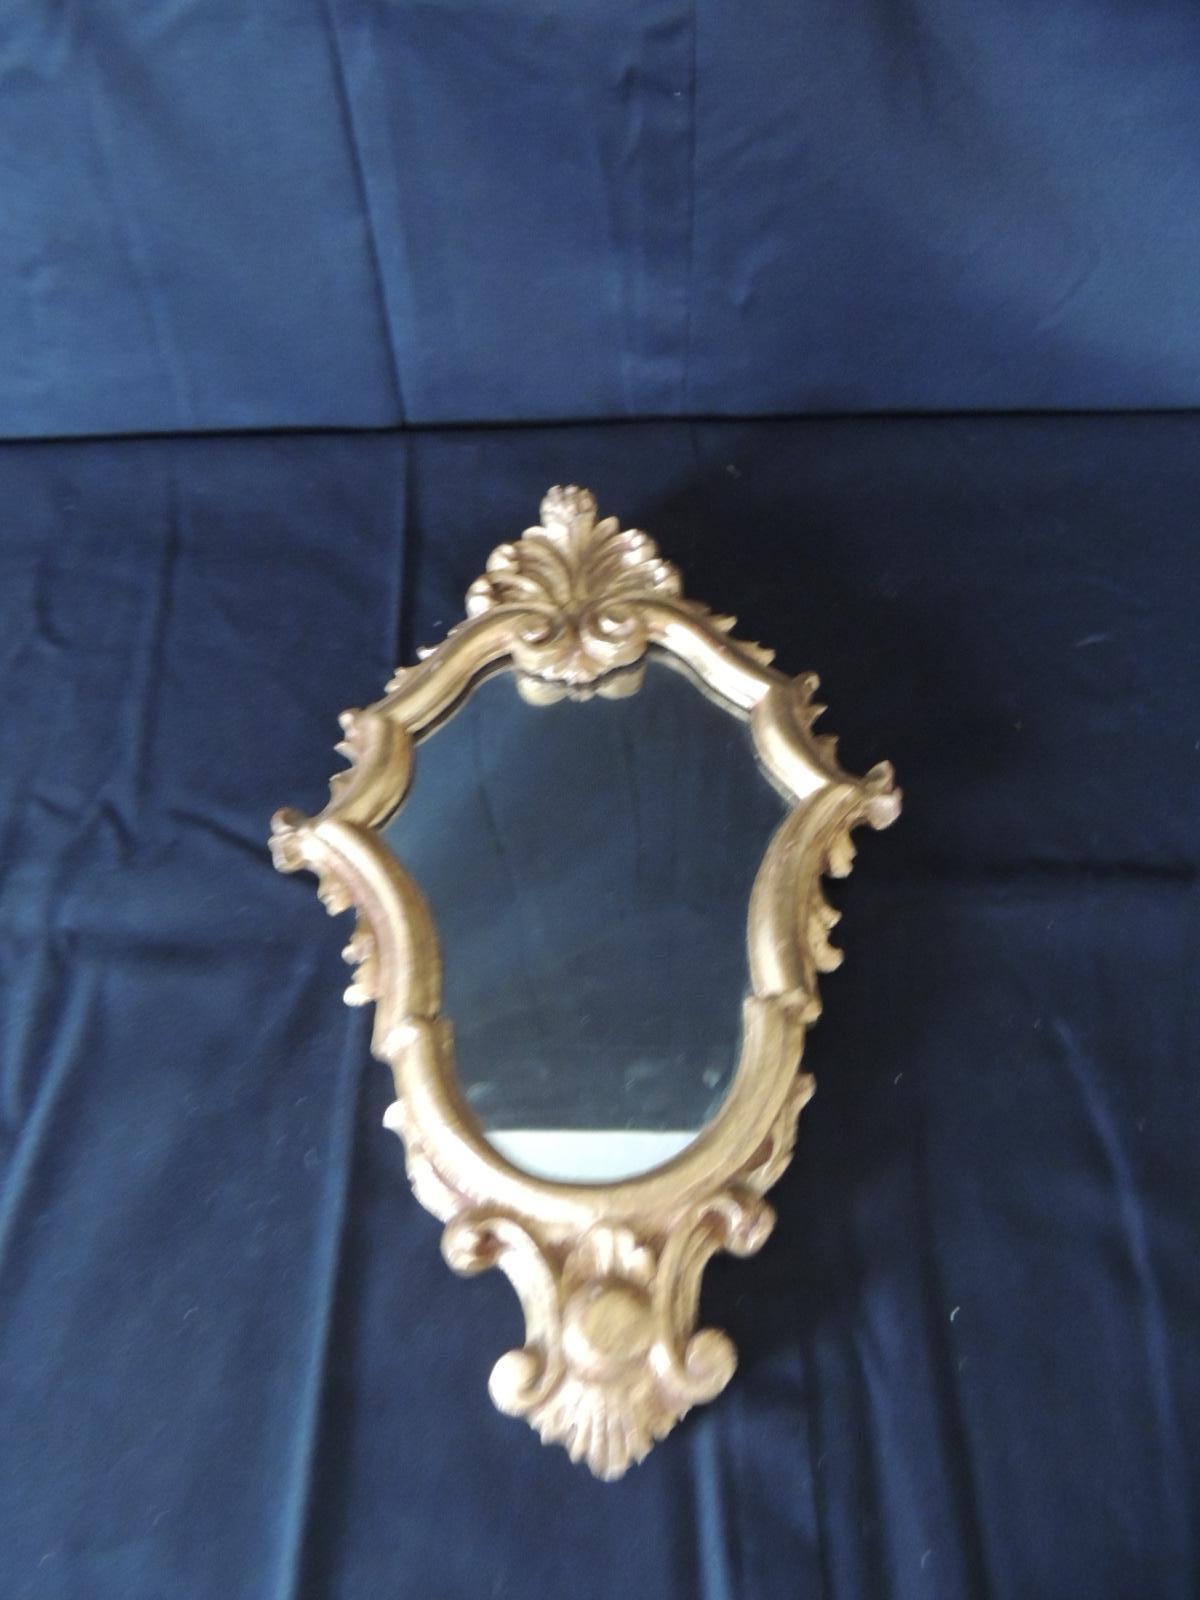 Small vintage ornate wood carved Italian gold leaf wall mirror. Serpentine lines with a stylized feathers crest on top and bottom. 
Original made by hand, Hanging hook.
Italy 1960s.
Measures: 8.5